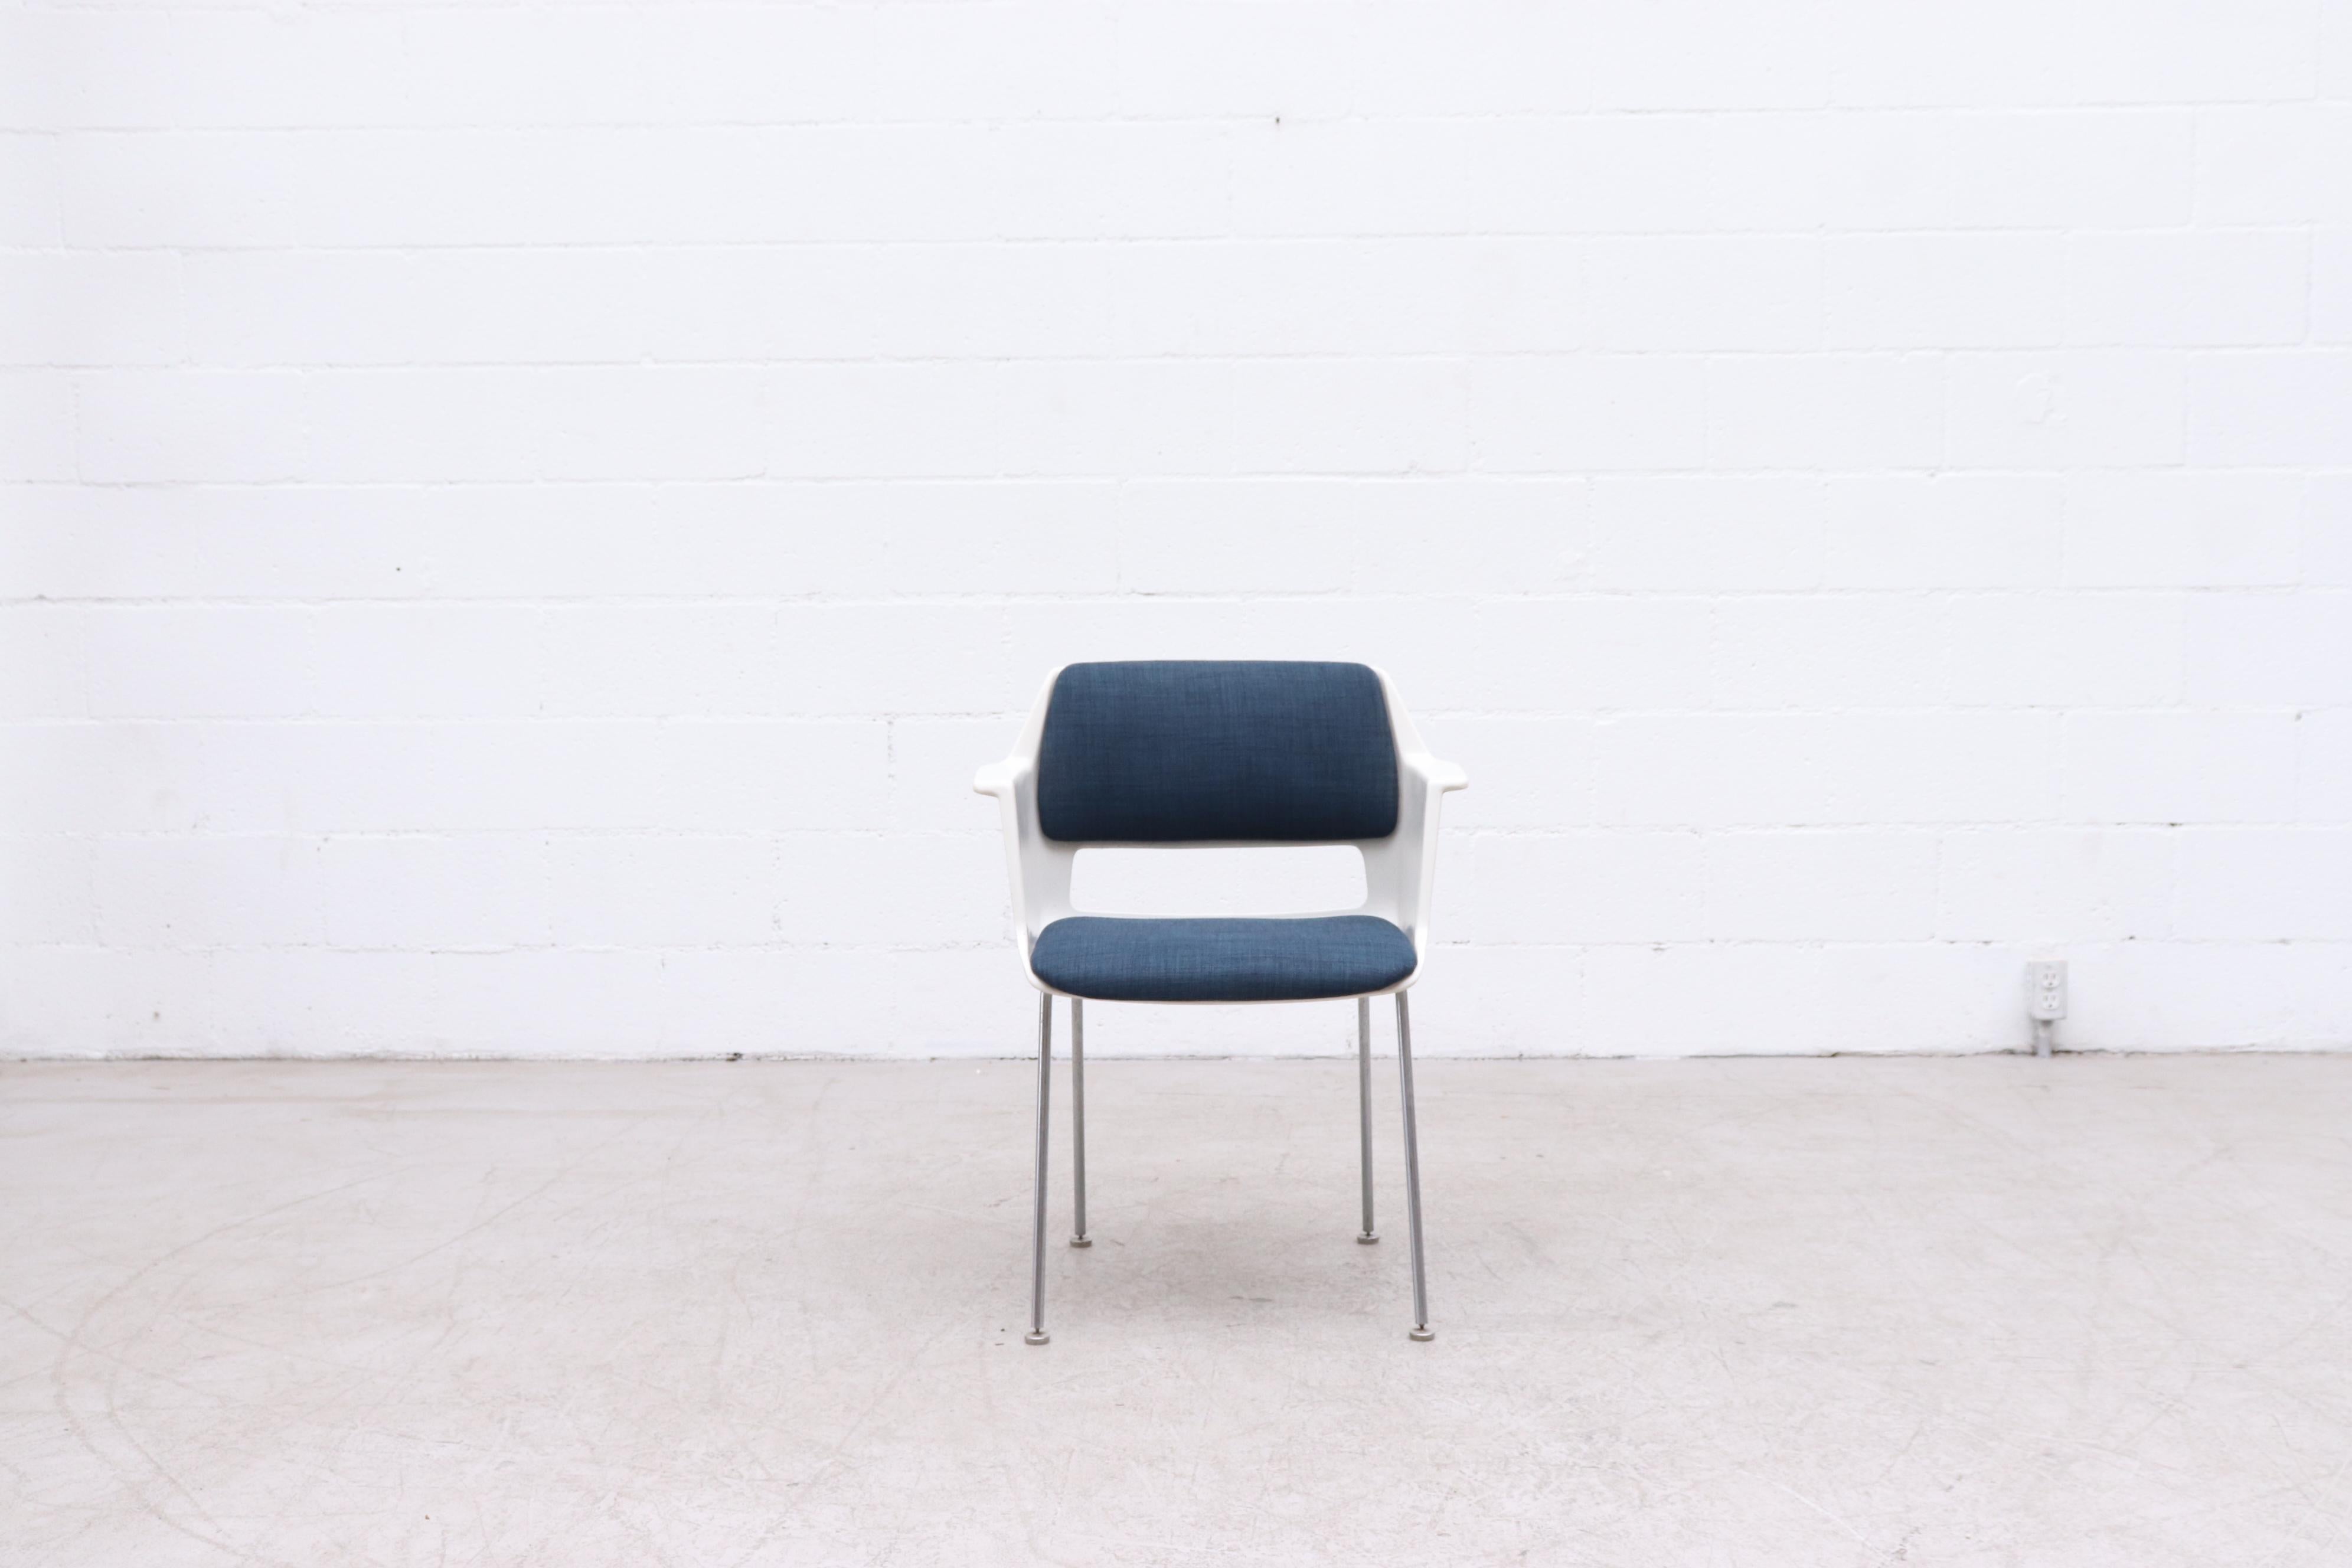 Attractive Gispen arm chair with new blue upholstered fabric, molded acrylic frame and tubular metal legs. In original condition with wear consistent with its age and use.